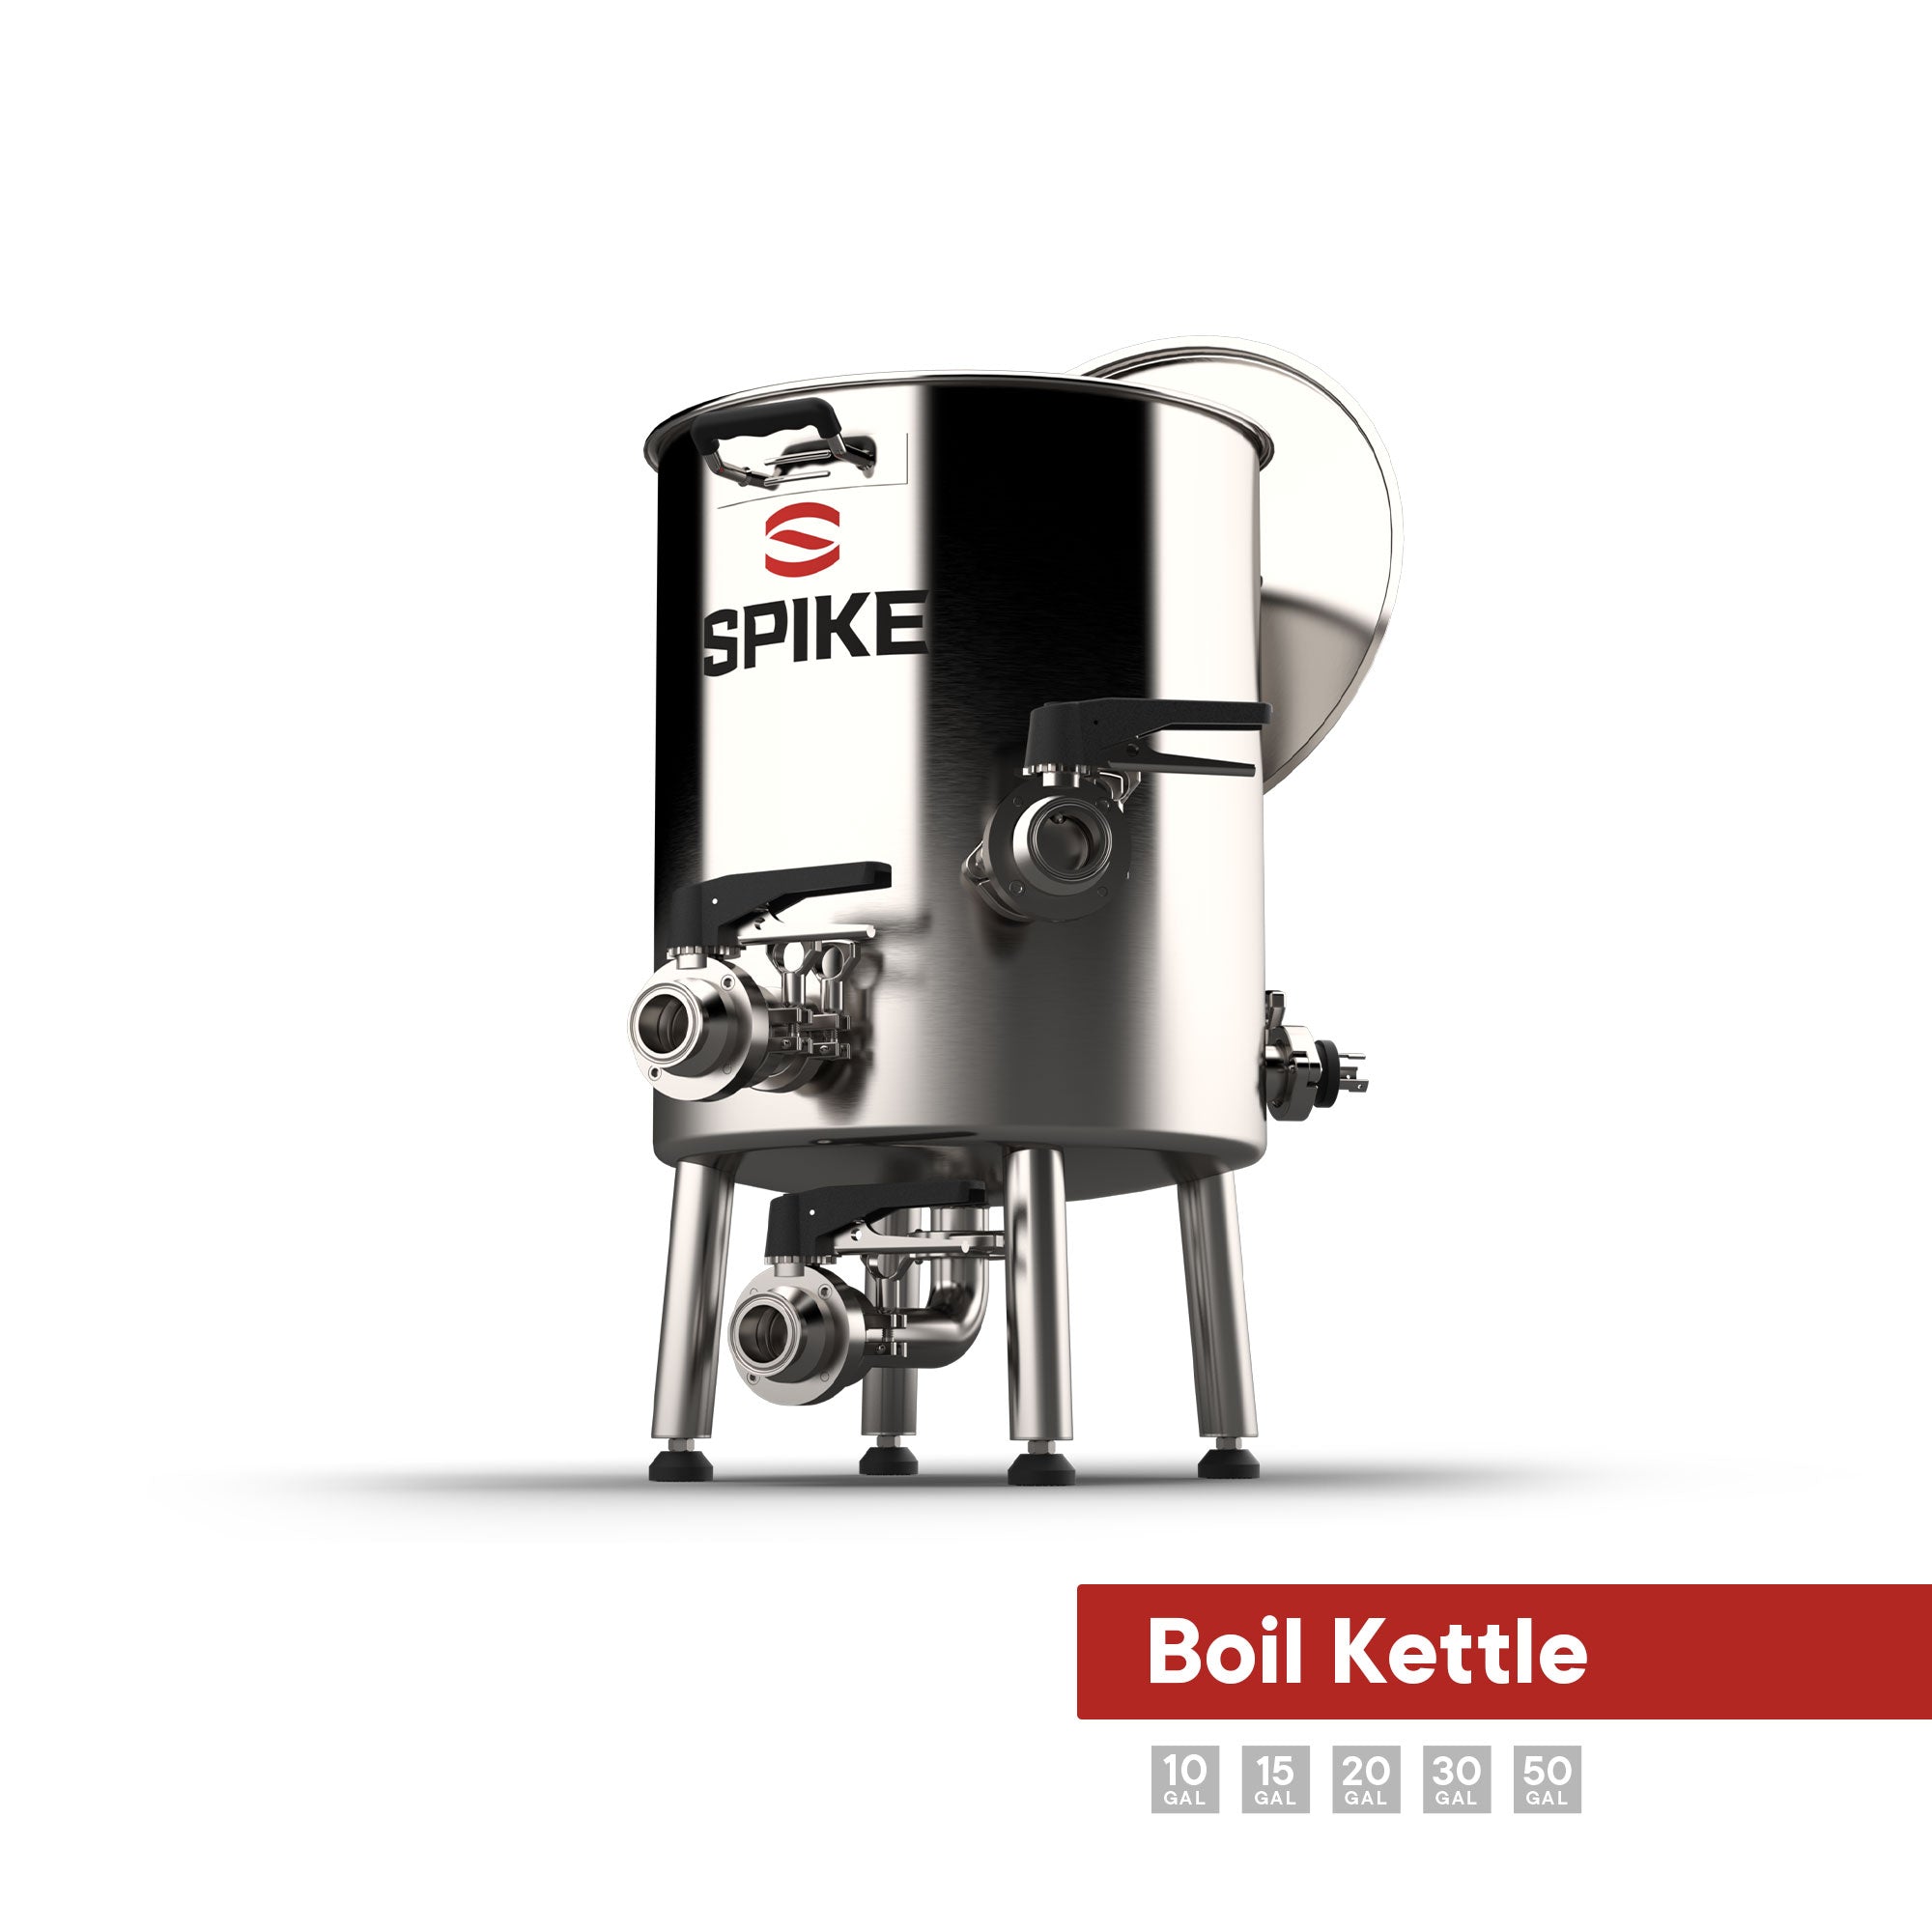 BrewBuilt Brewing Kettle with Tri-Clamp Fittings - 10 Gallon